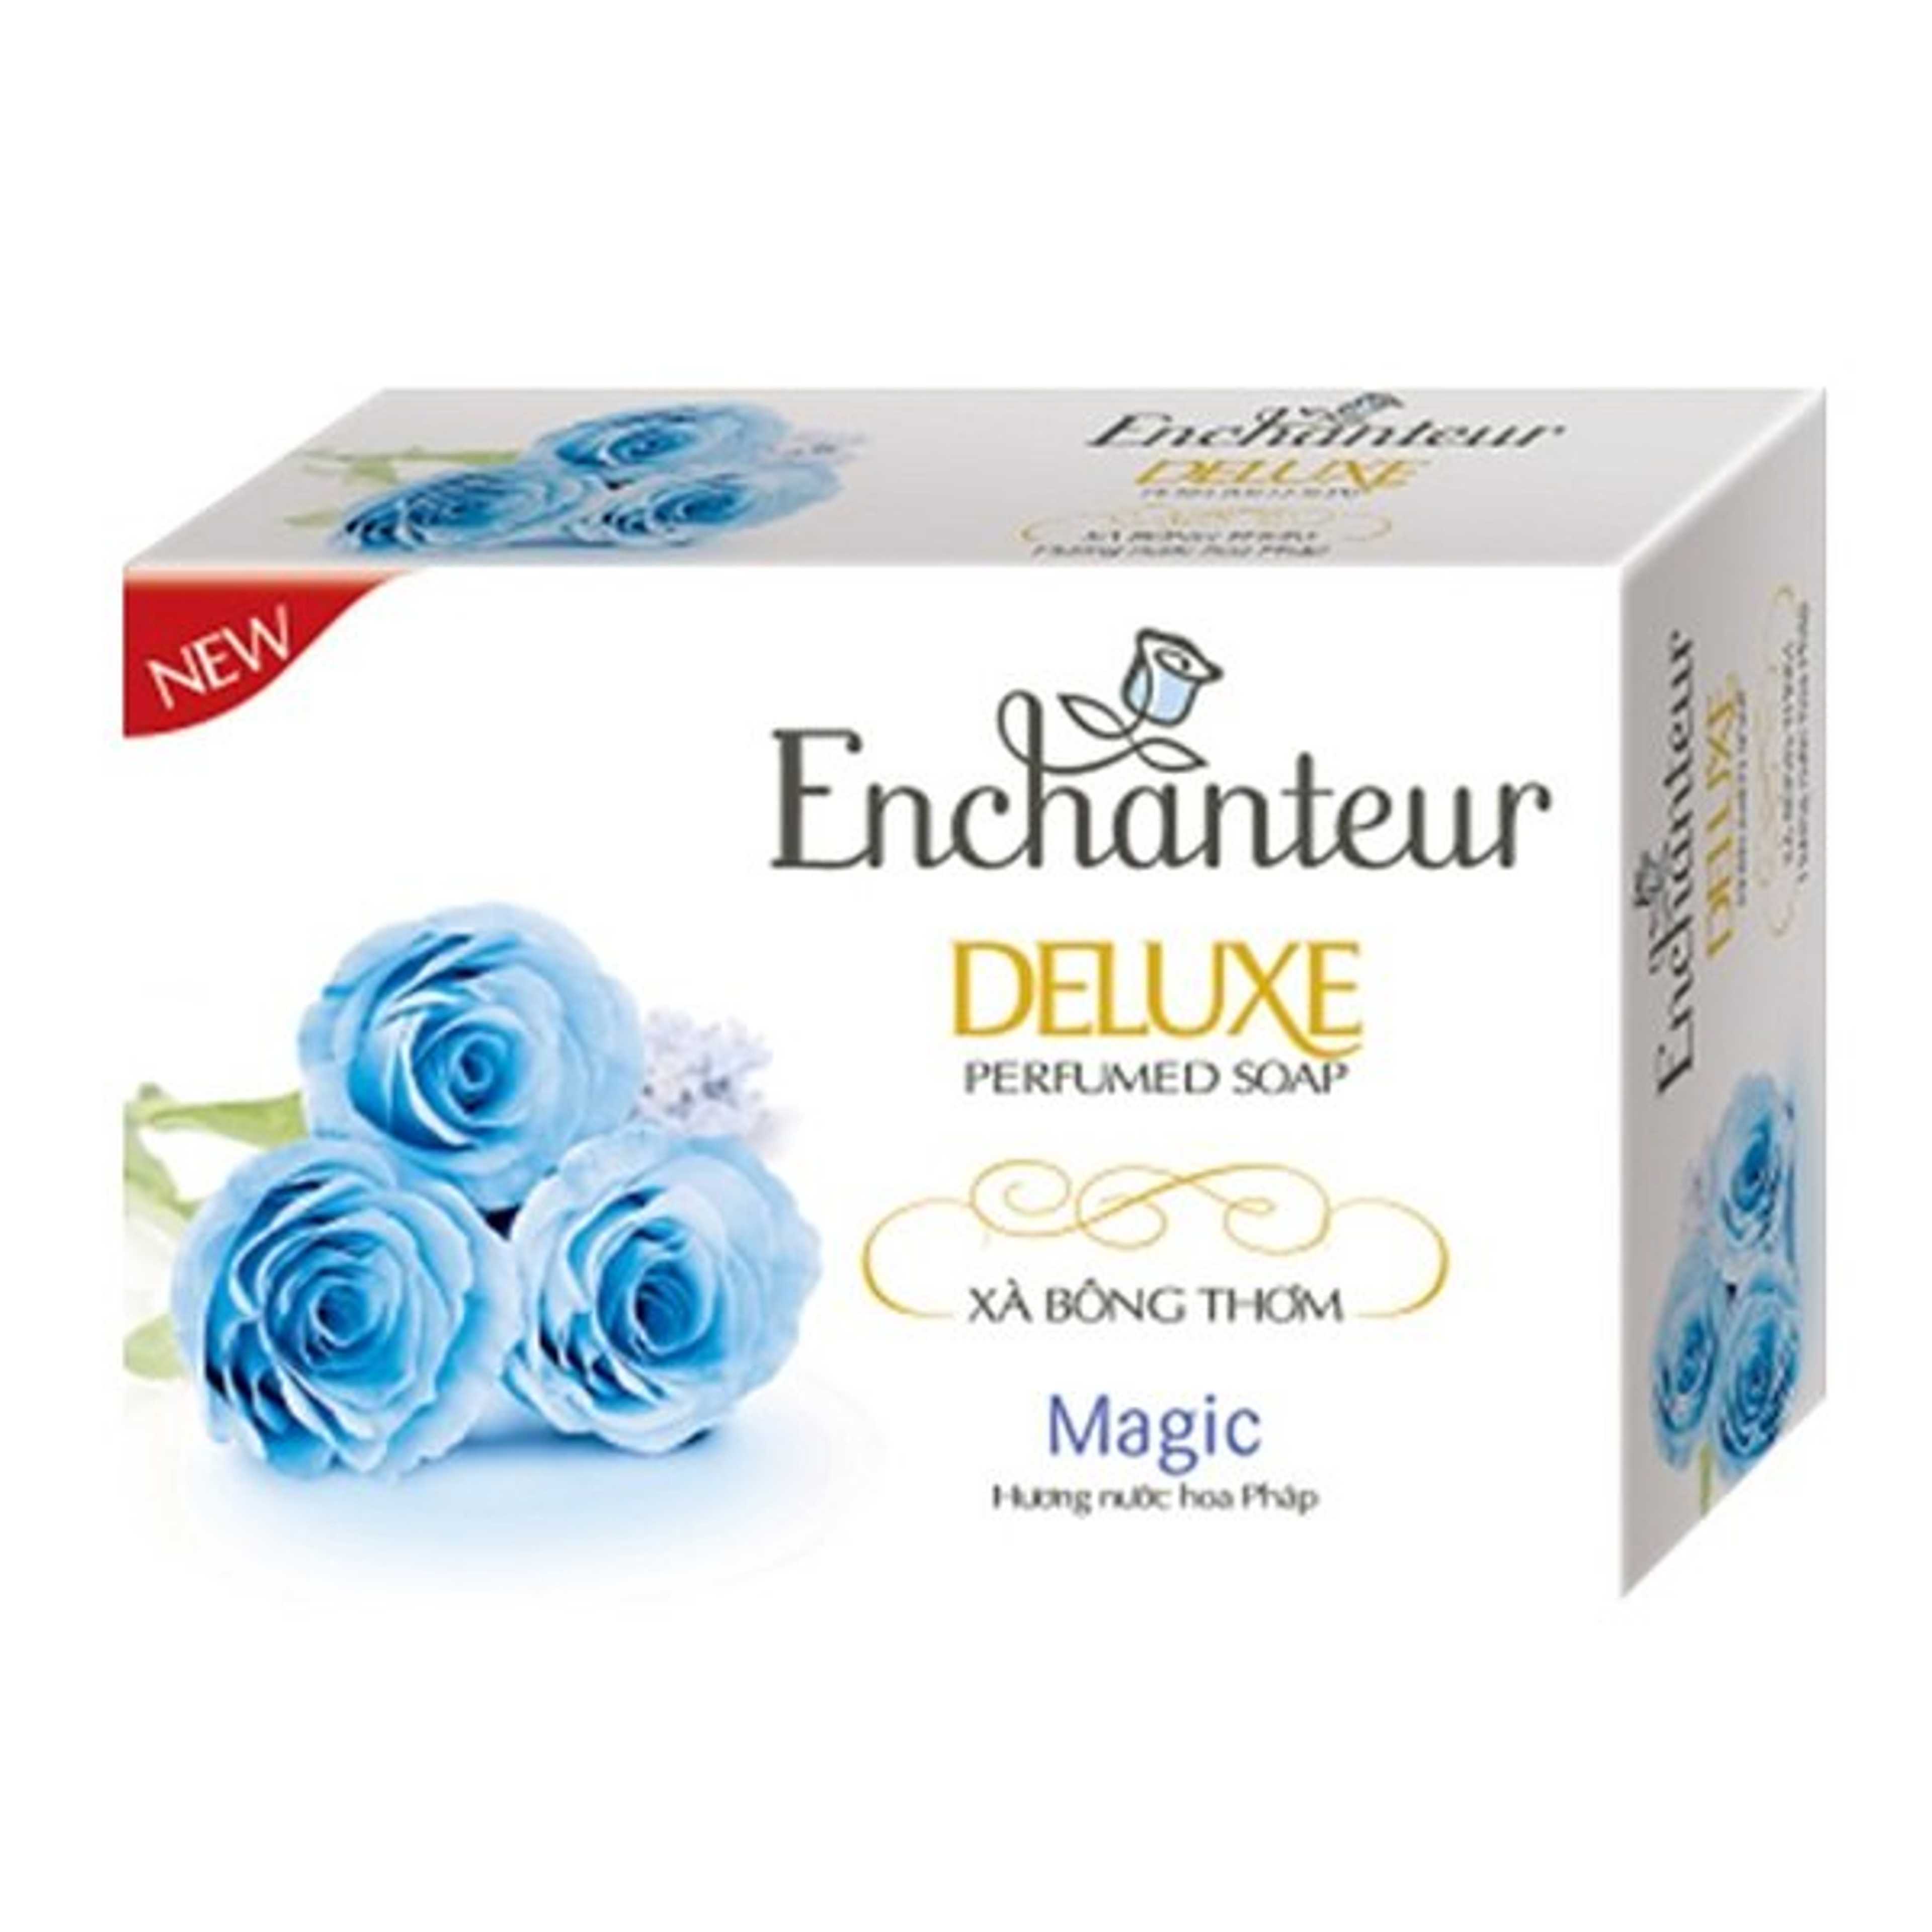 ENCHAN_TEUR DELUXE PERFUMED SOAP MAGIC 90G (Imported)